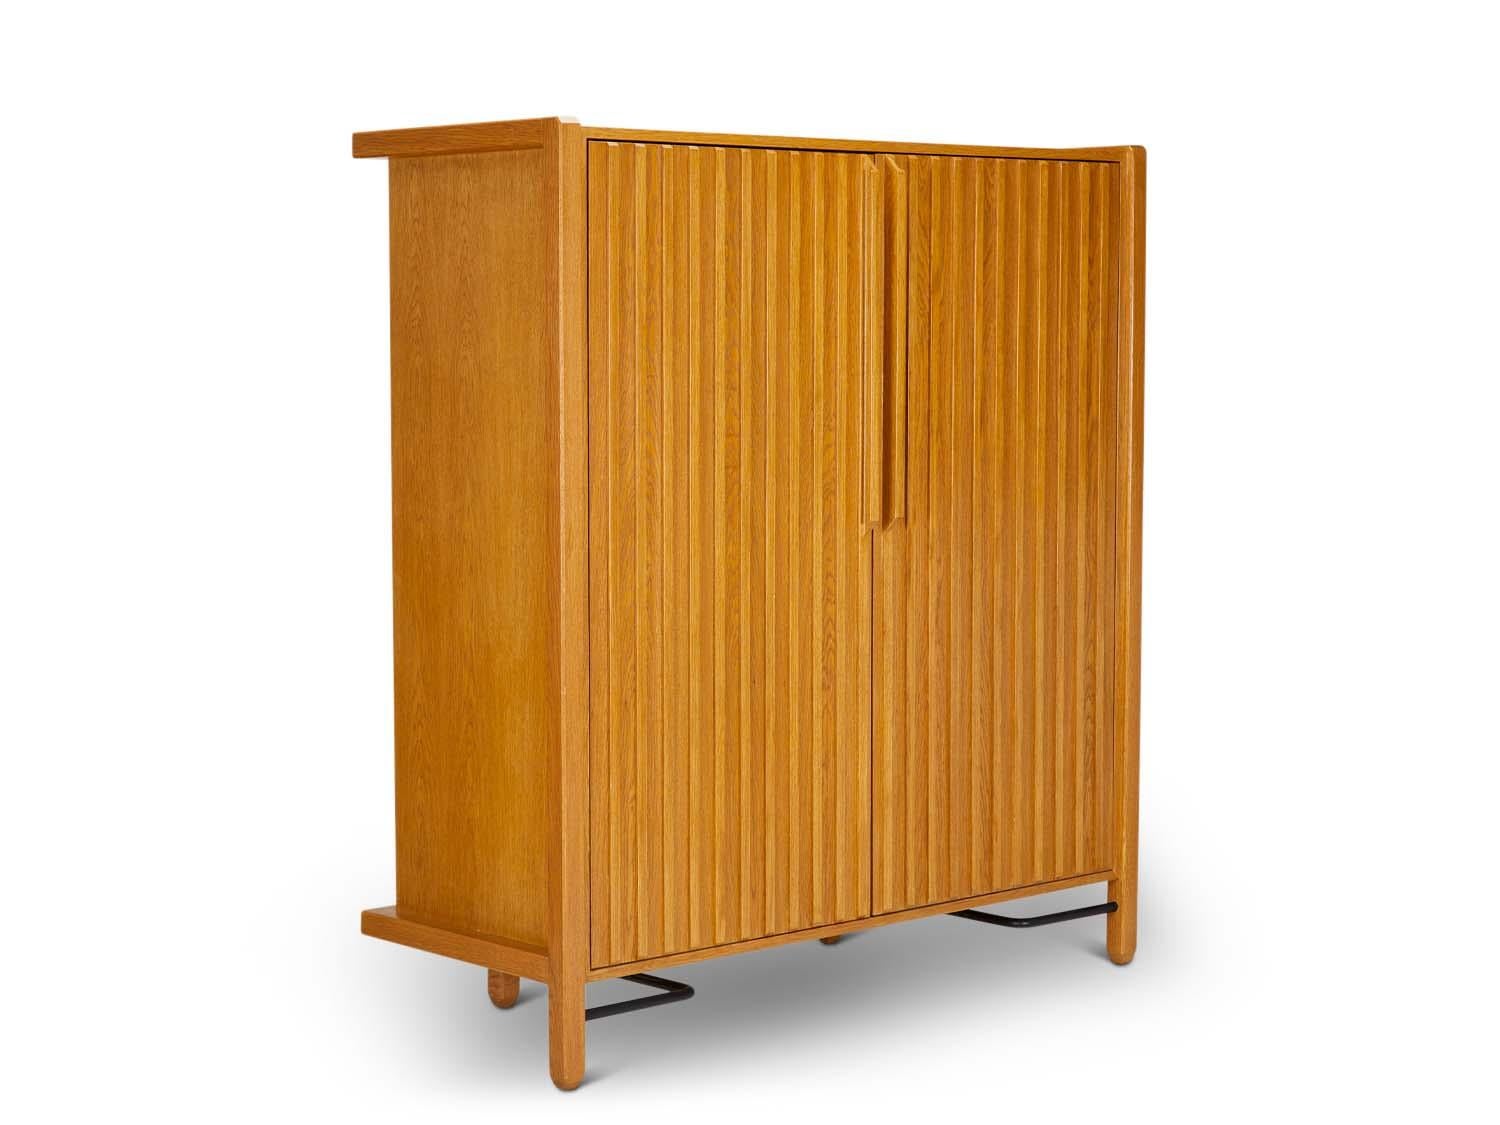 The Ojai Tall Cabinet has 2 doors, open storage and four drawers. It has solid white oak or American walnut legs and case, and features a metal stretcher on the base.

 The Lawson-Fenning Collection is designed and handmade in Los Angeles,